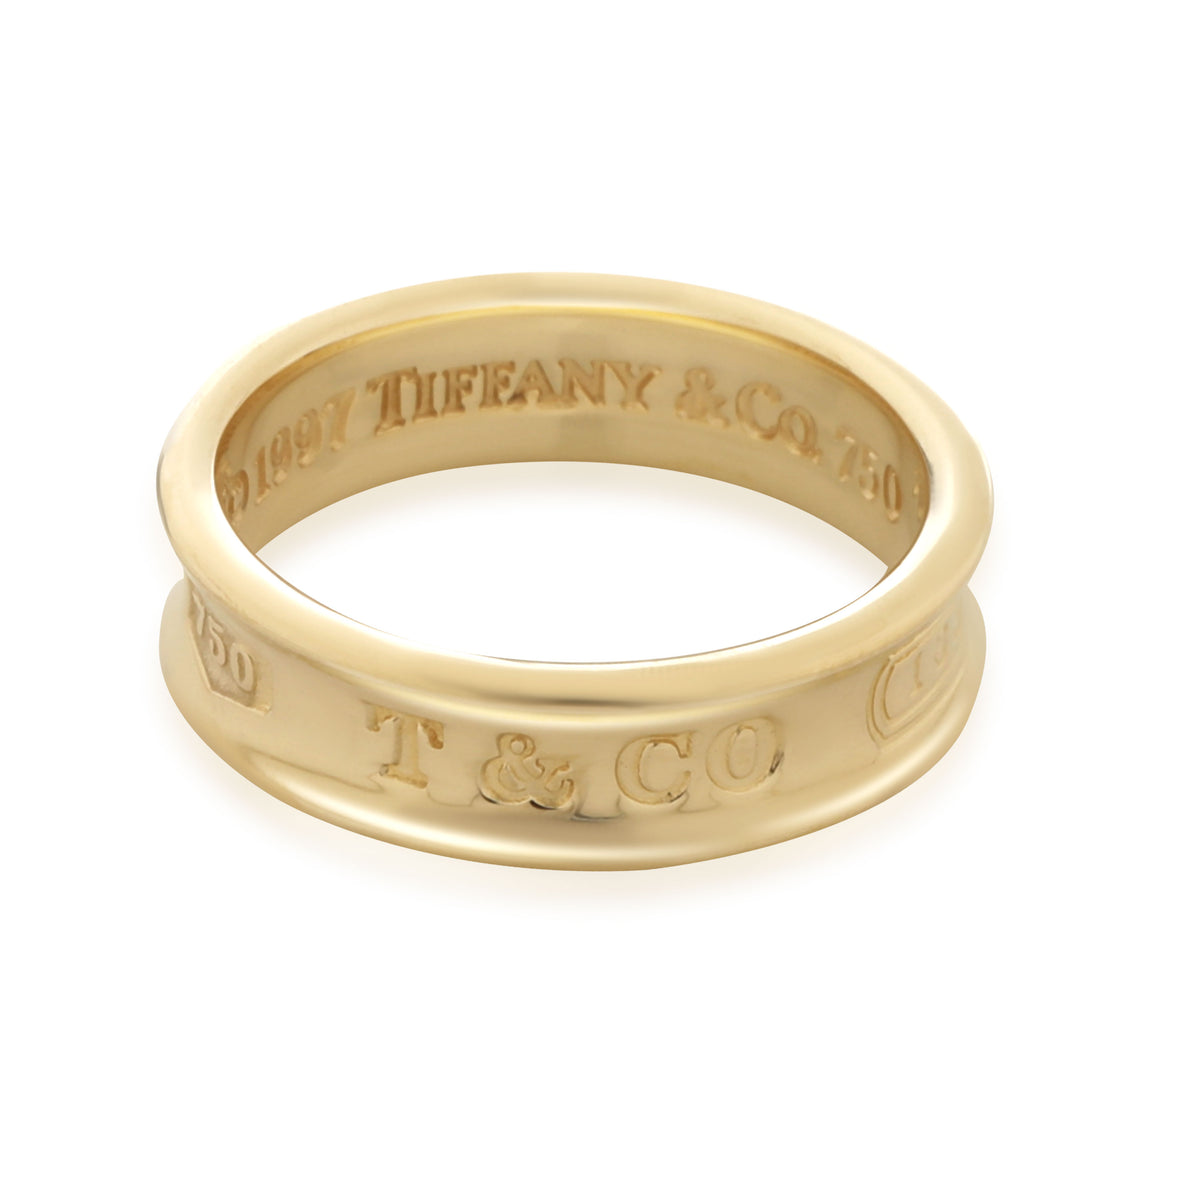 Tiffany & Co. 1837 Band in 18K Yellow Gold